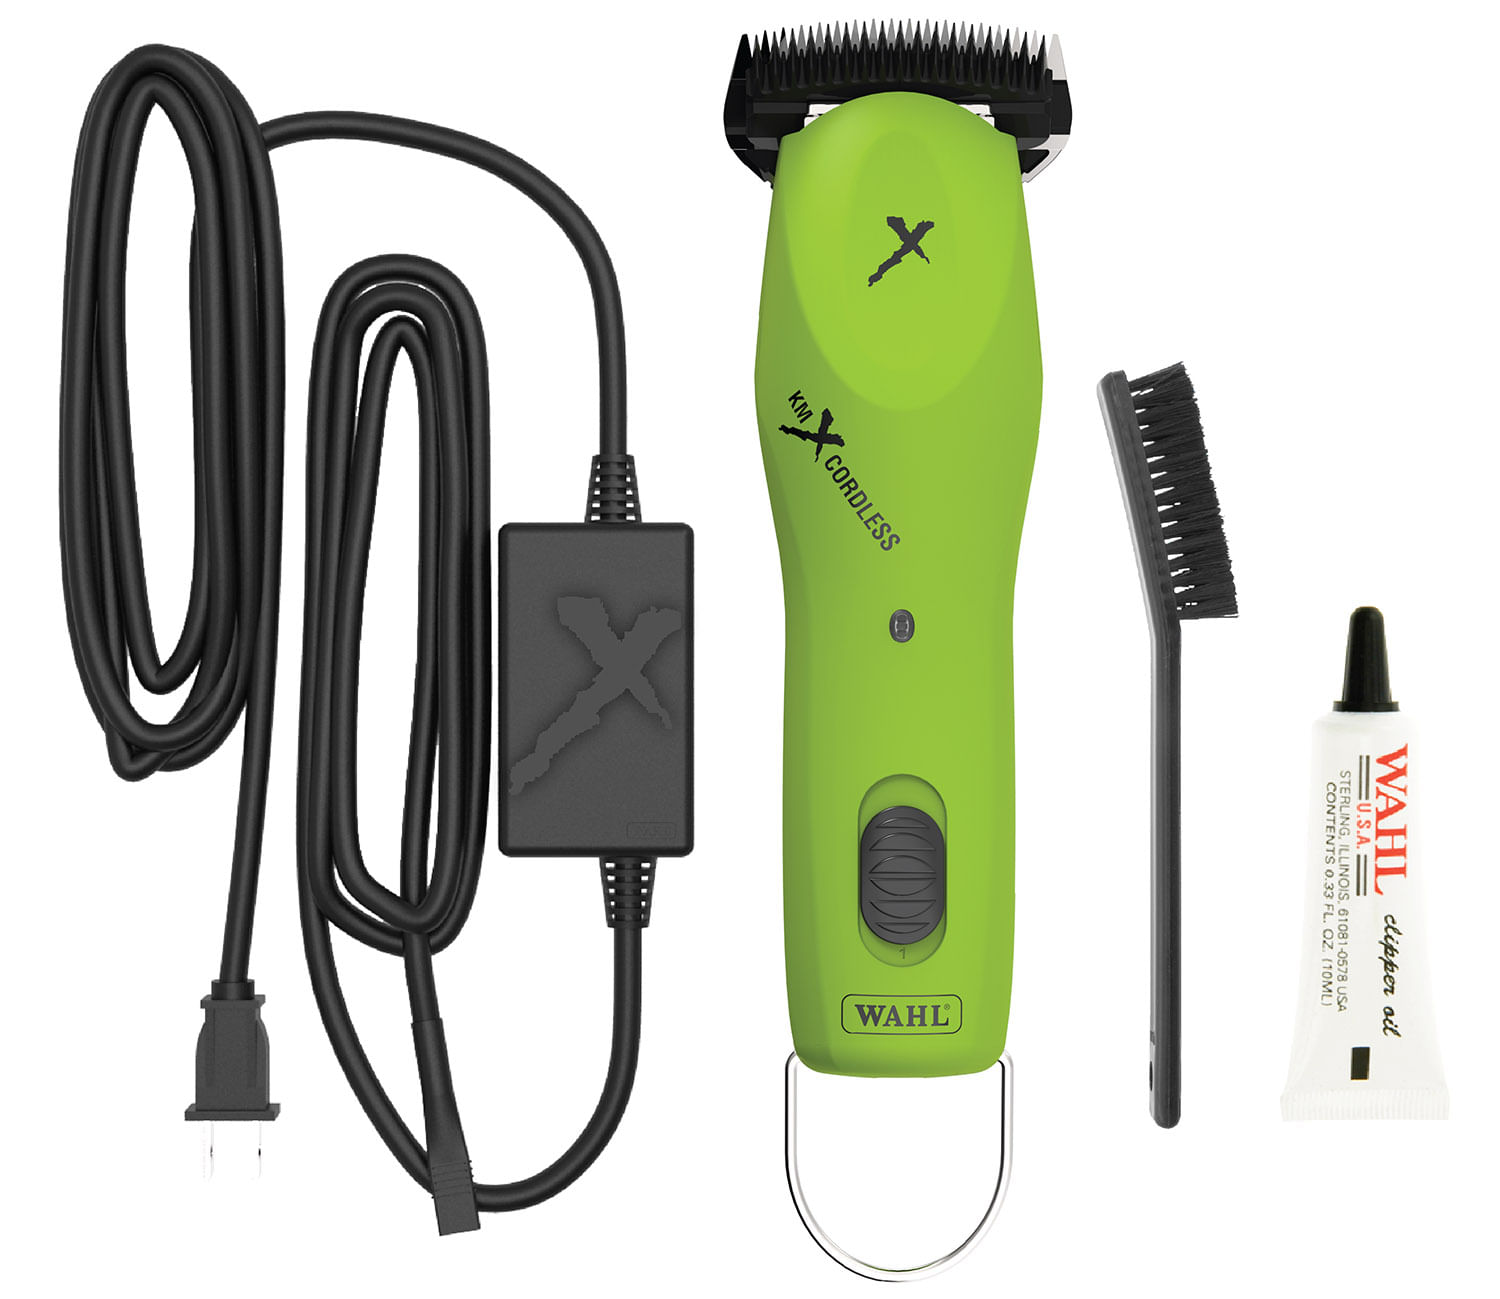 WAhl Clippers Oil 10 ml - The best oil for your clippers